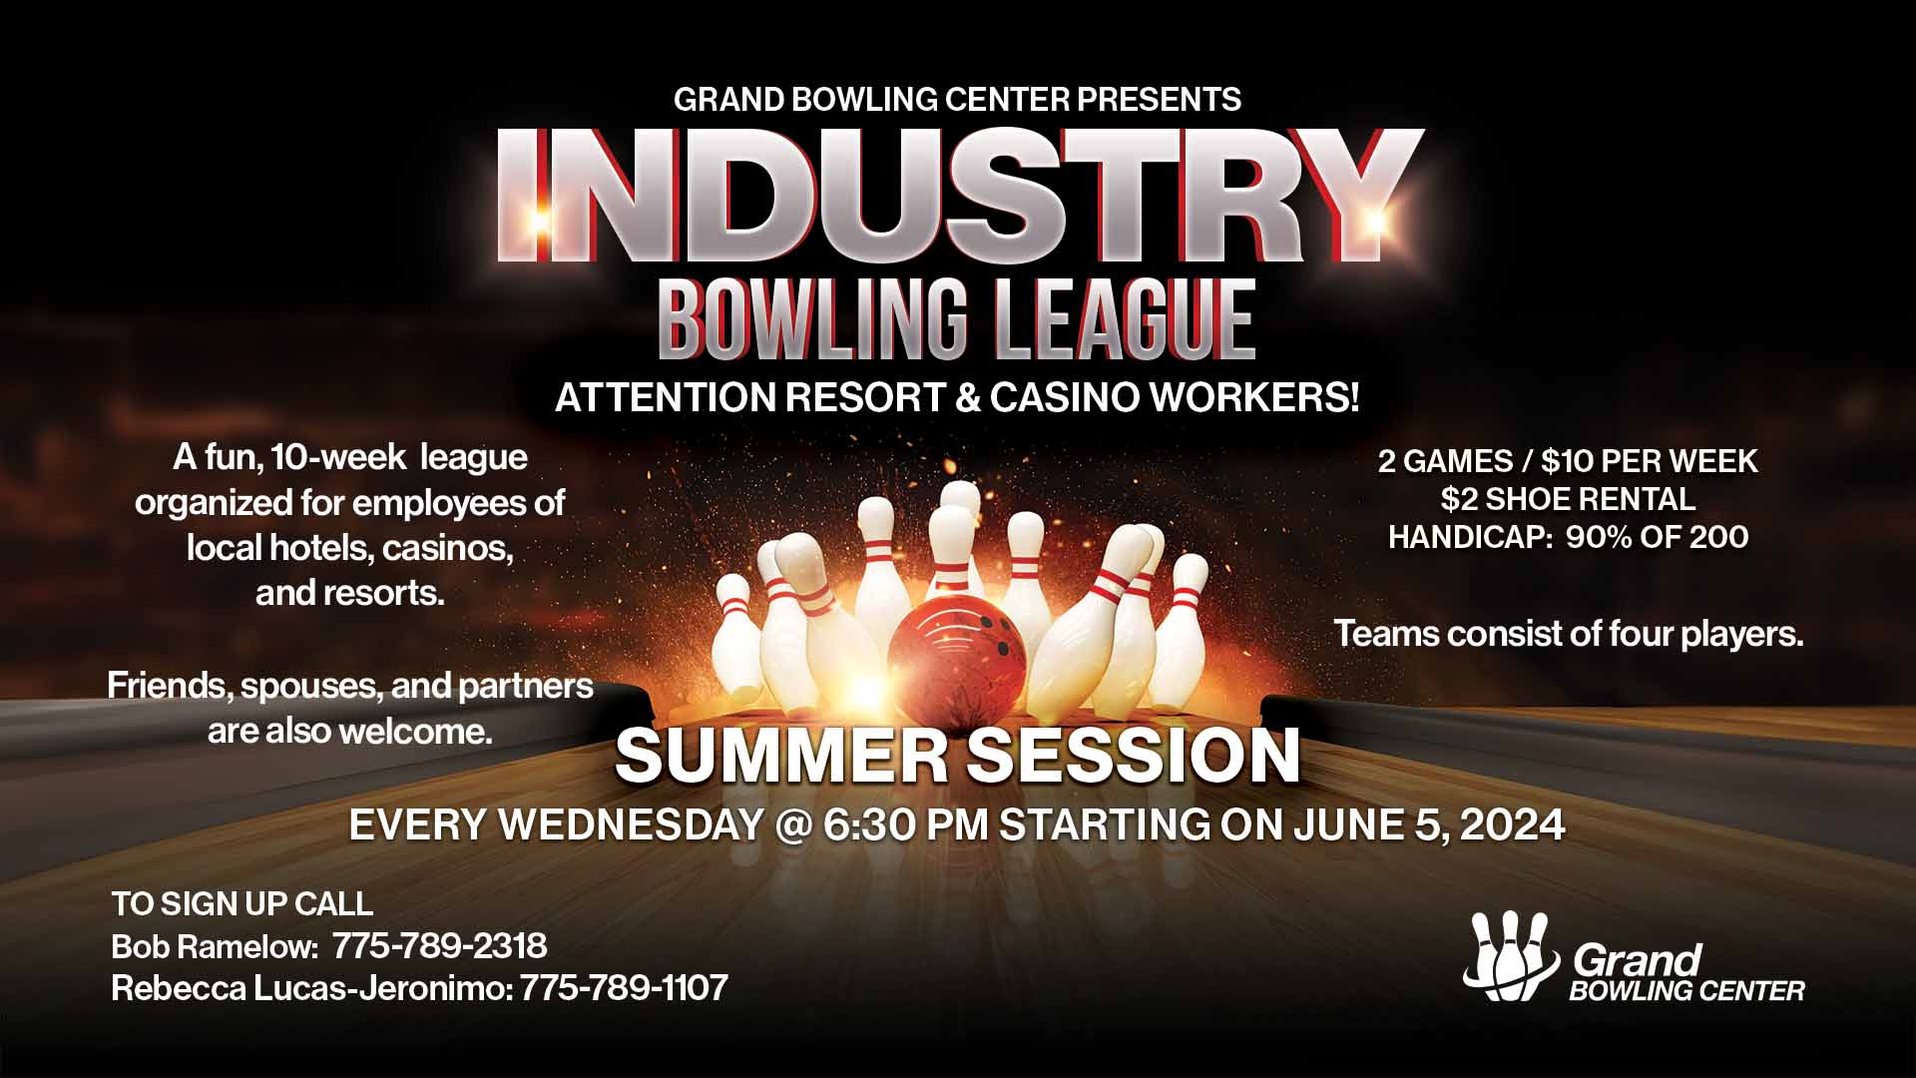 GSR Grand Bowling Center presents Industry Bowling League Summer Session every Wednesday at 6:30pm